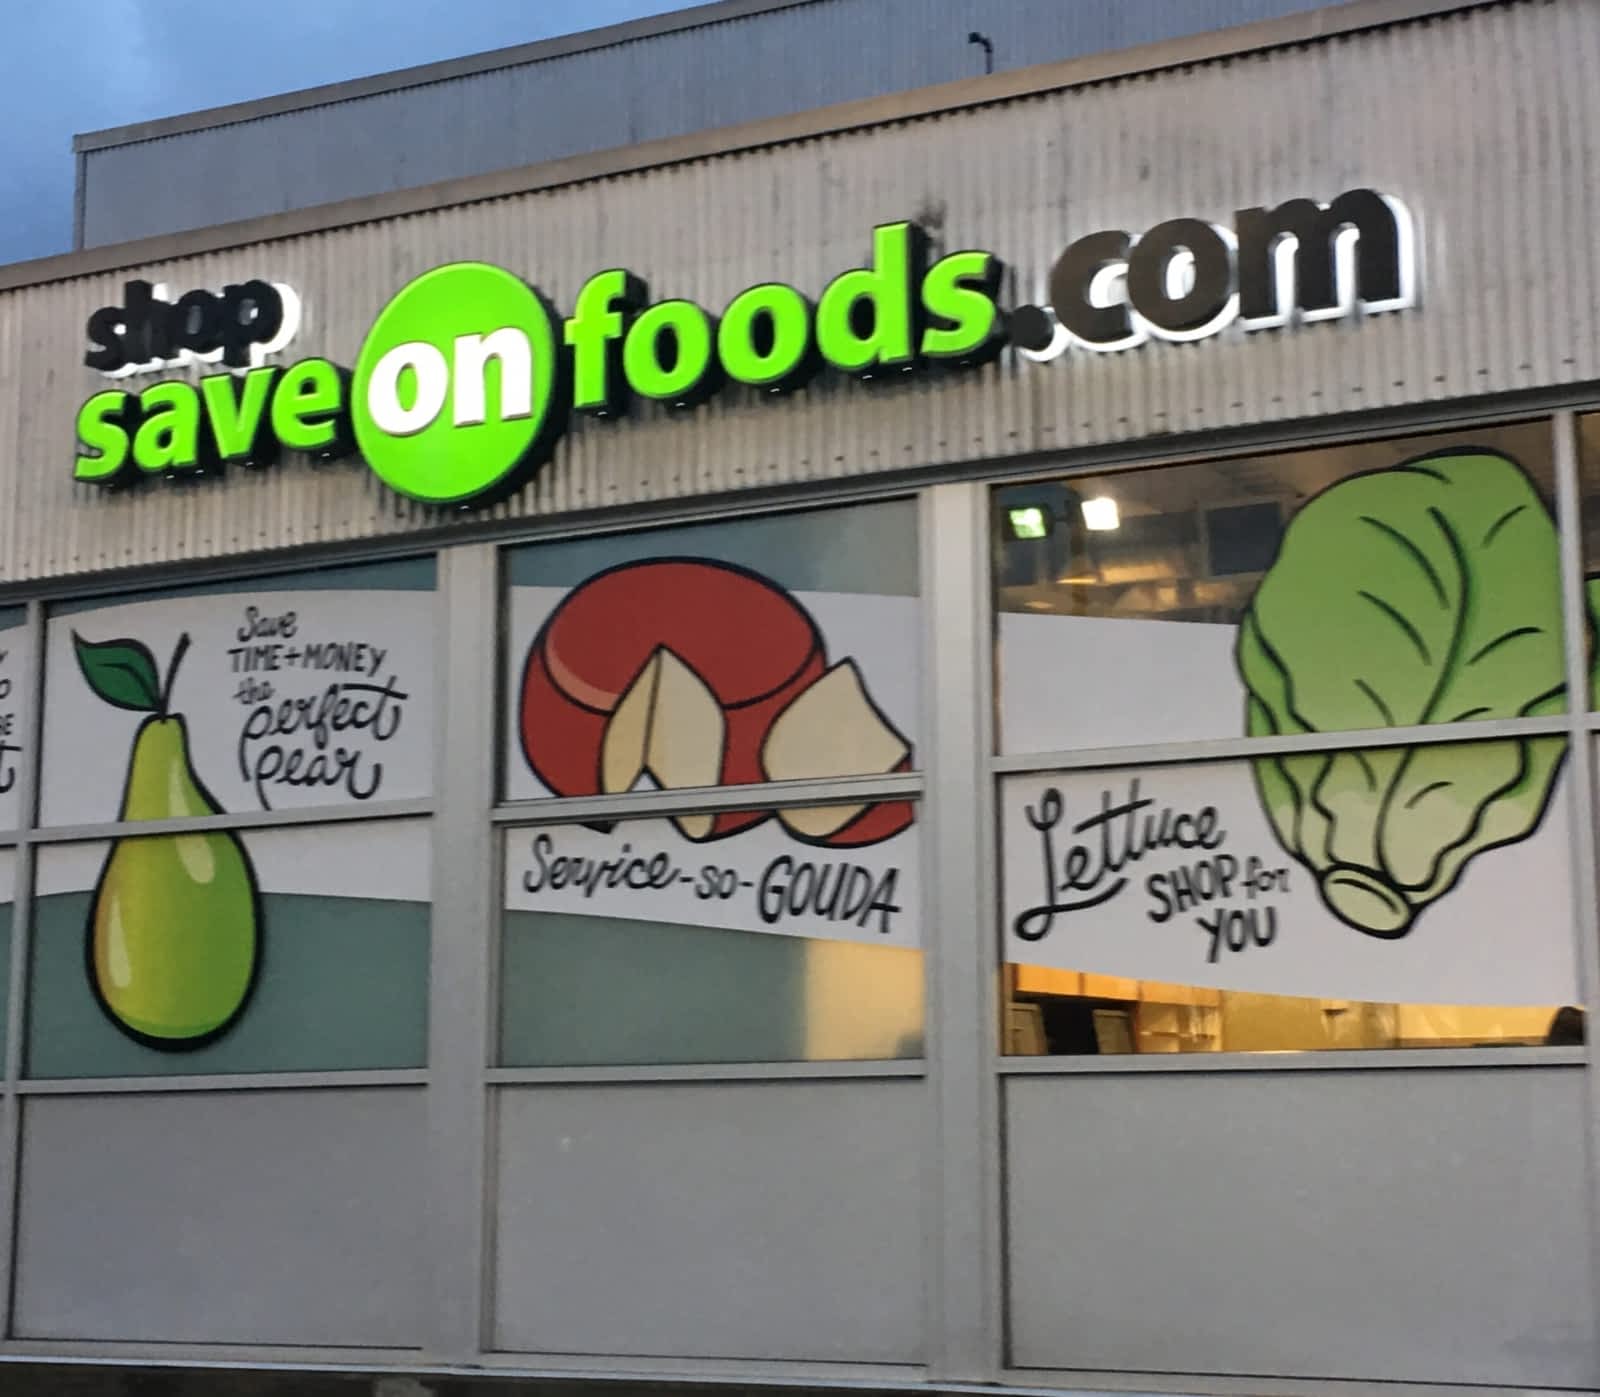 save on foods travel phone number